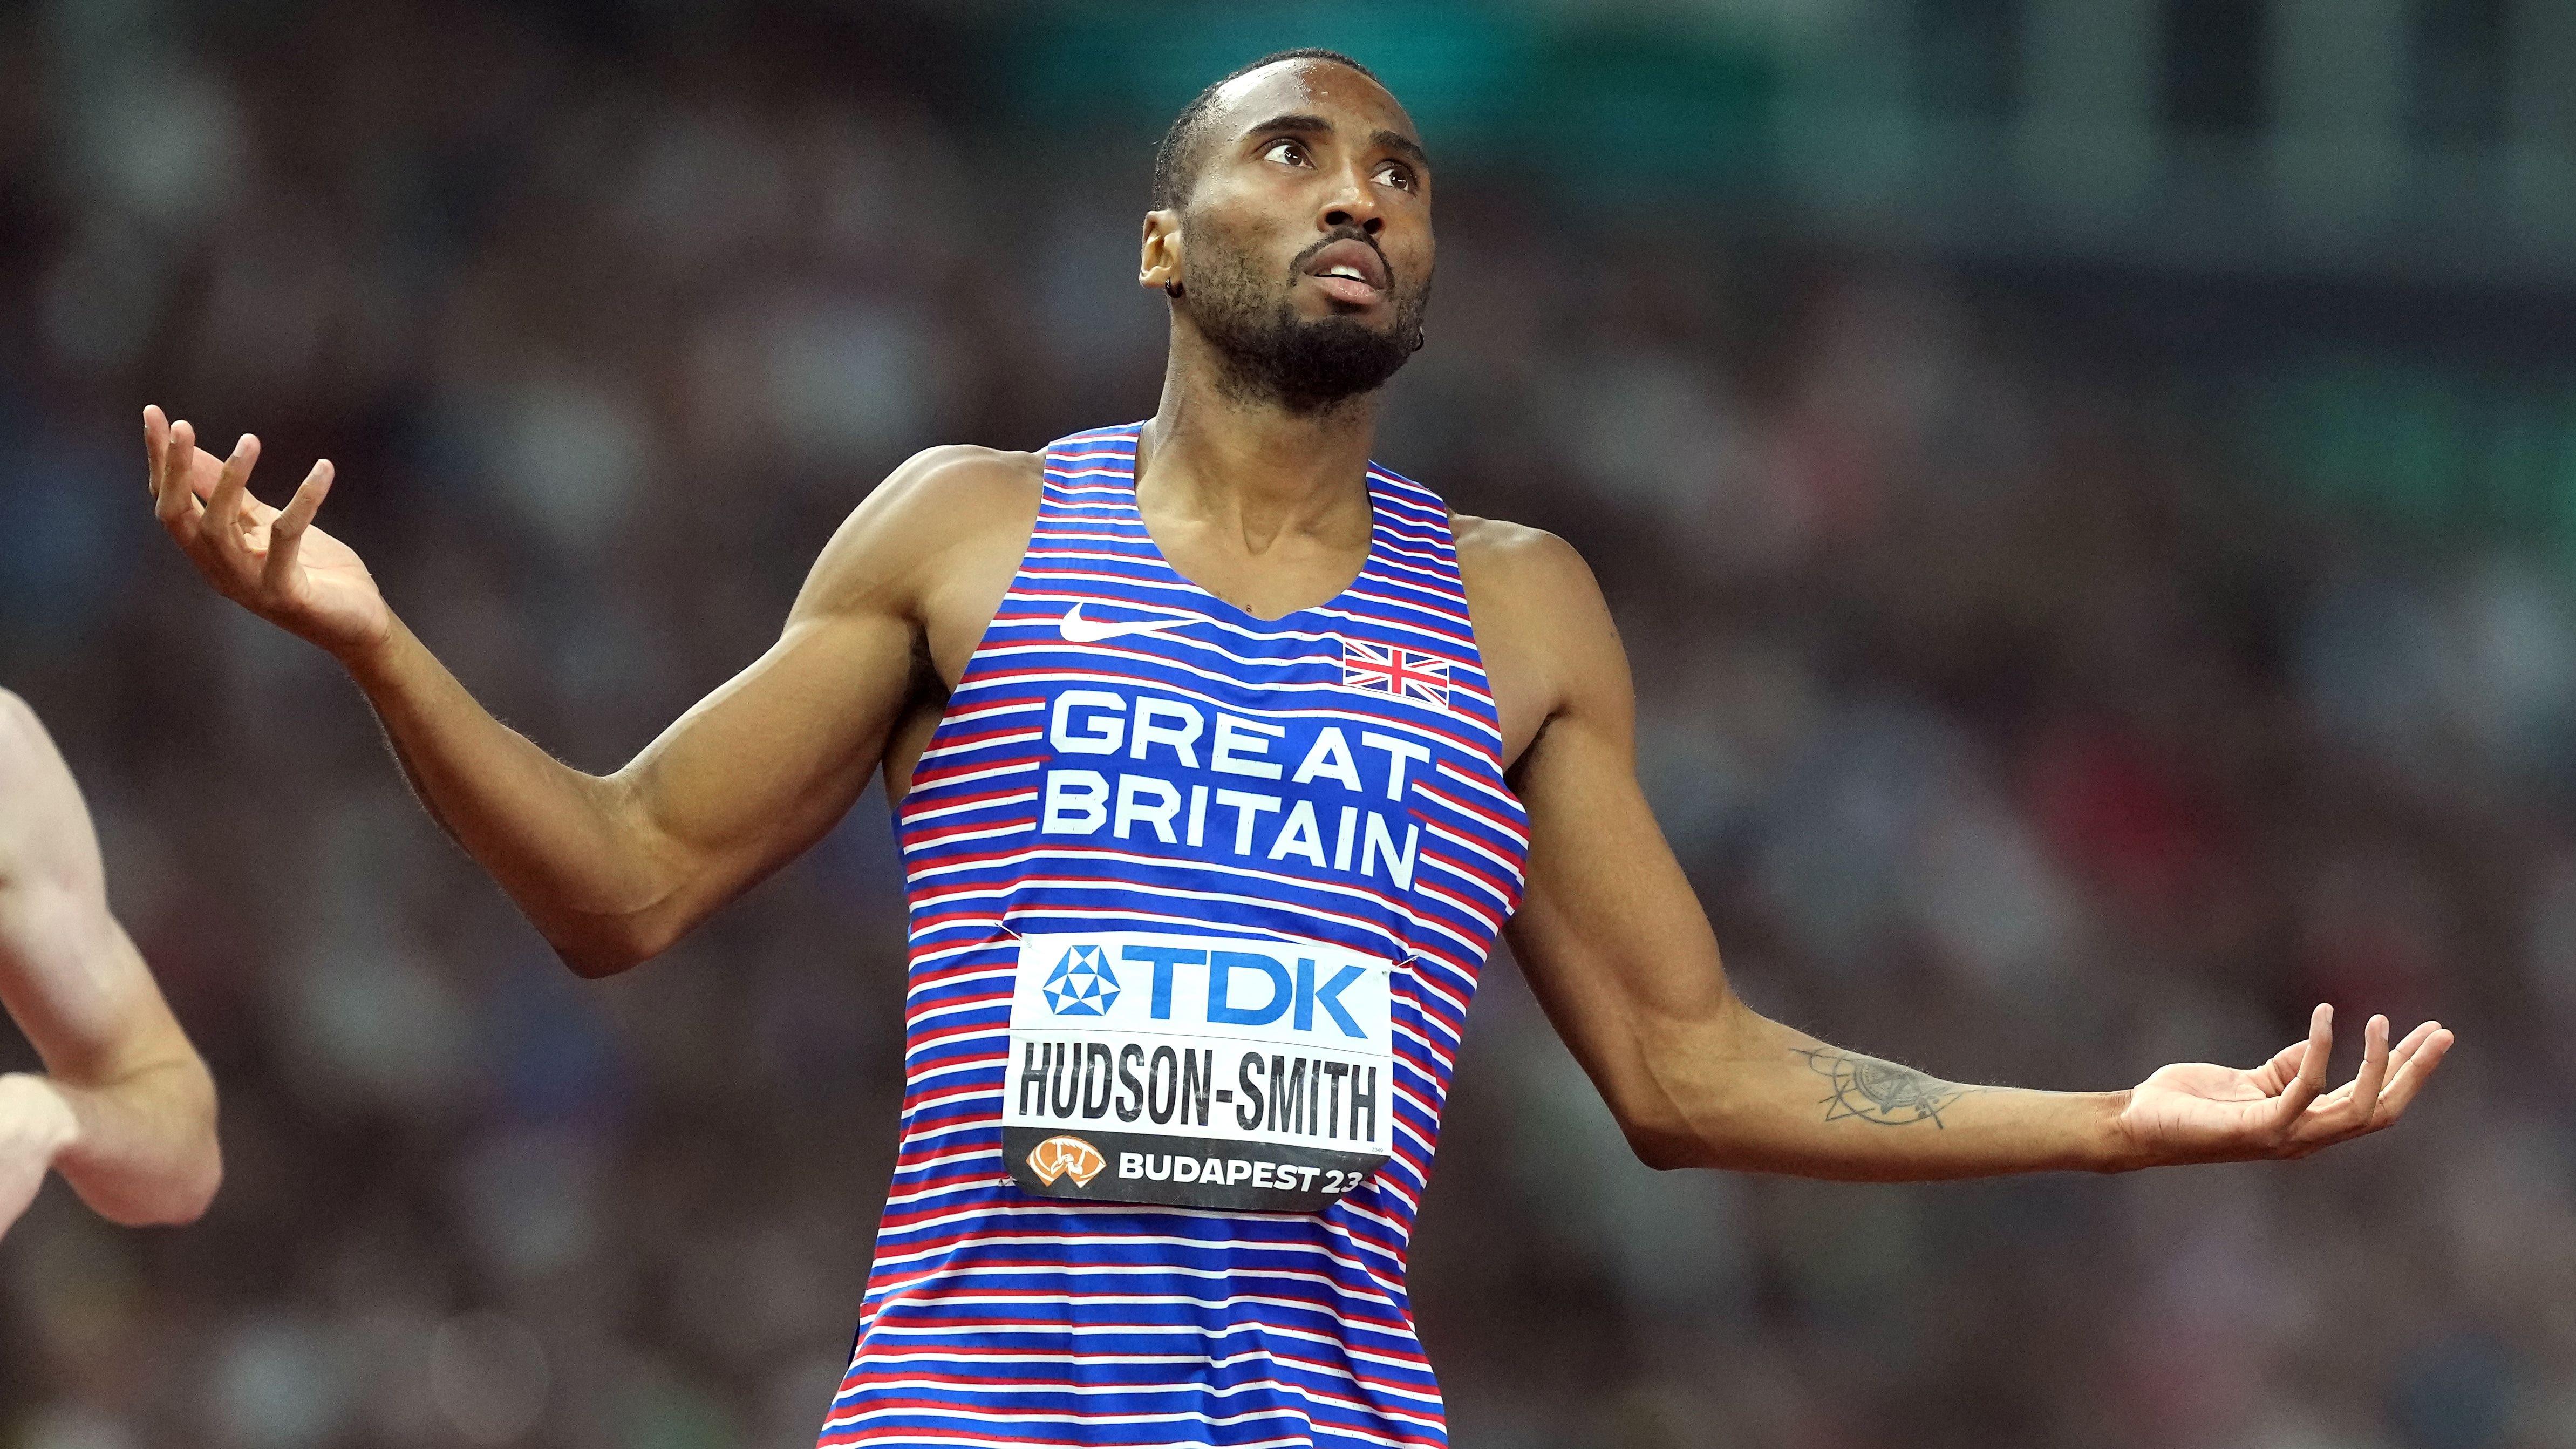 Matthew Hudson-Smith sets new European record in 400m at Oslo